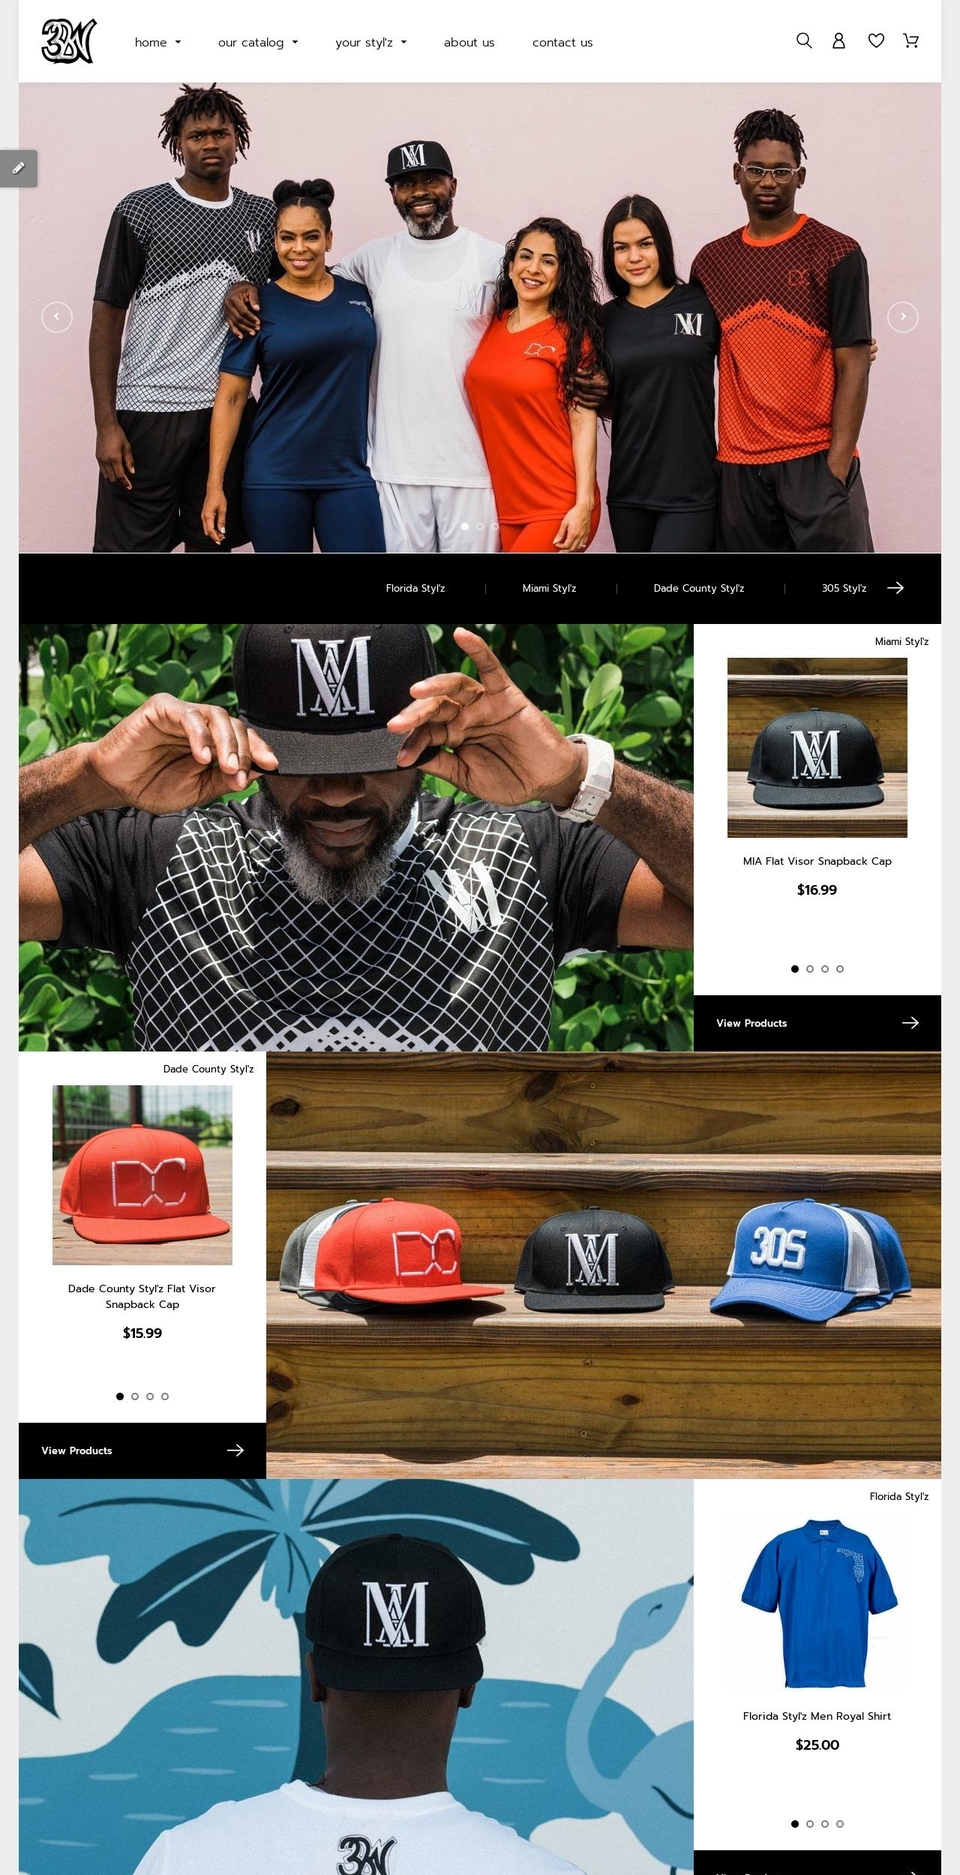 redhat Shopify theme site example 32weststylz.com